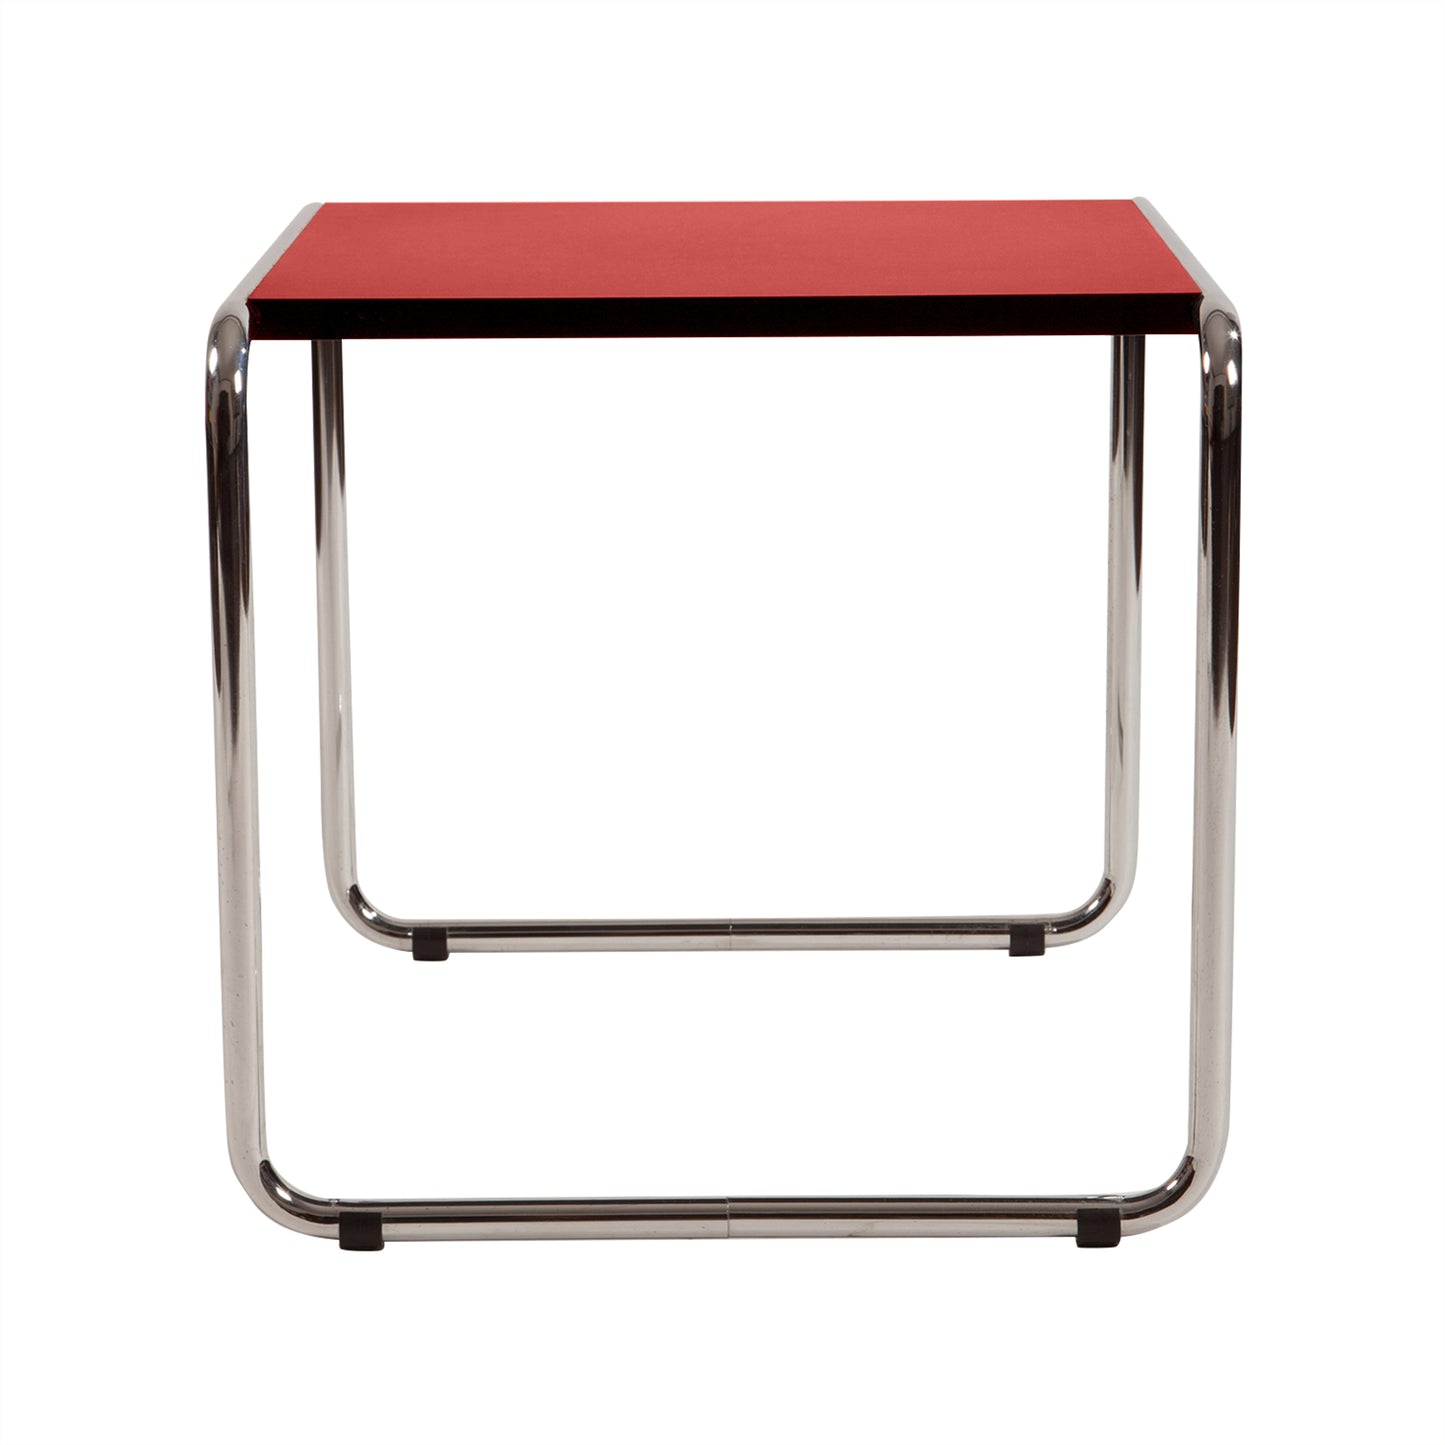 Laccio table style | Red | Front